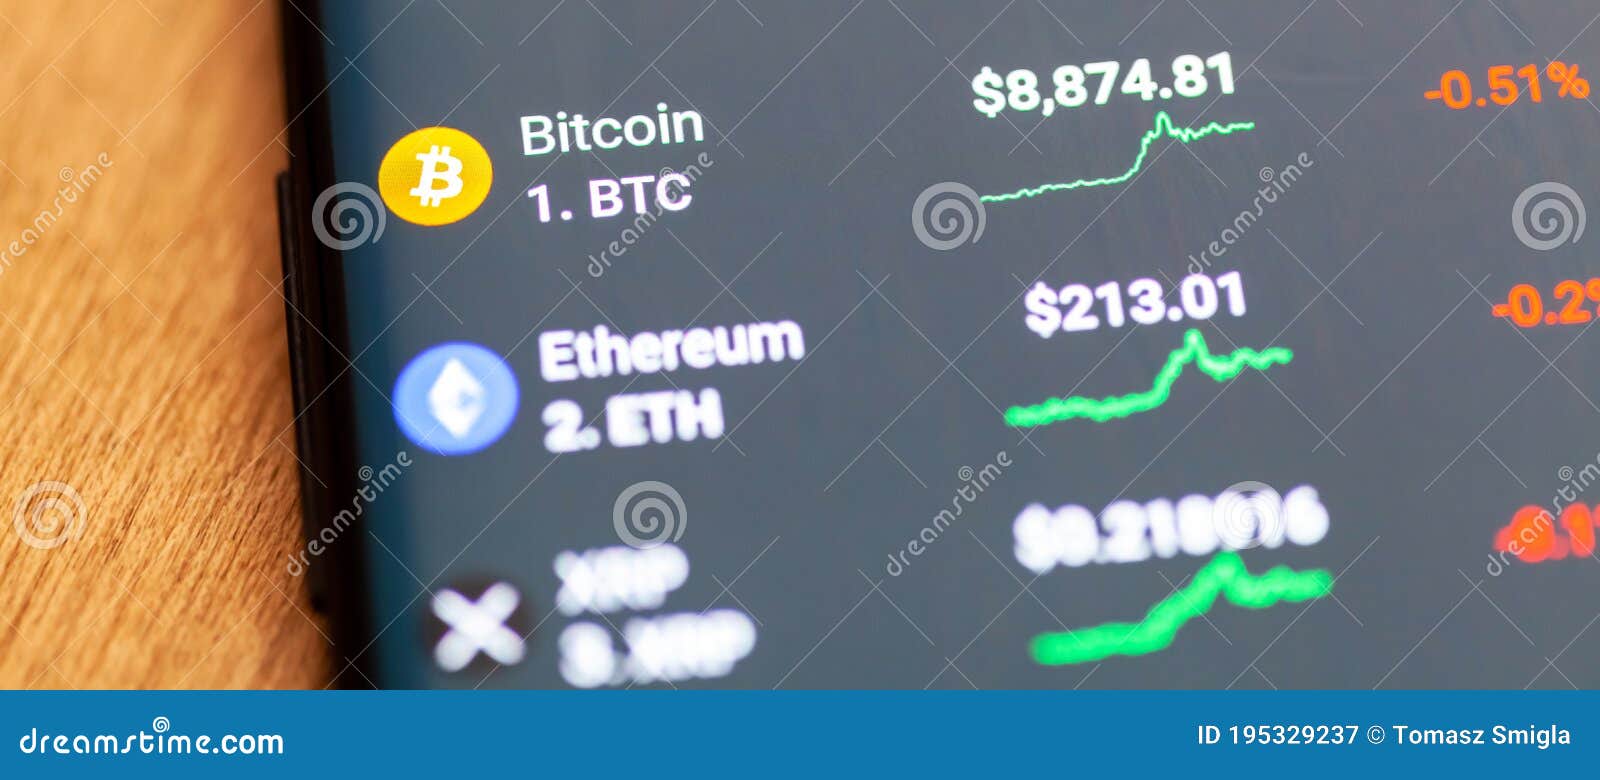 best cryptocurrency trading app cryptocurrency prices